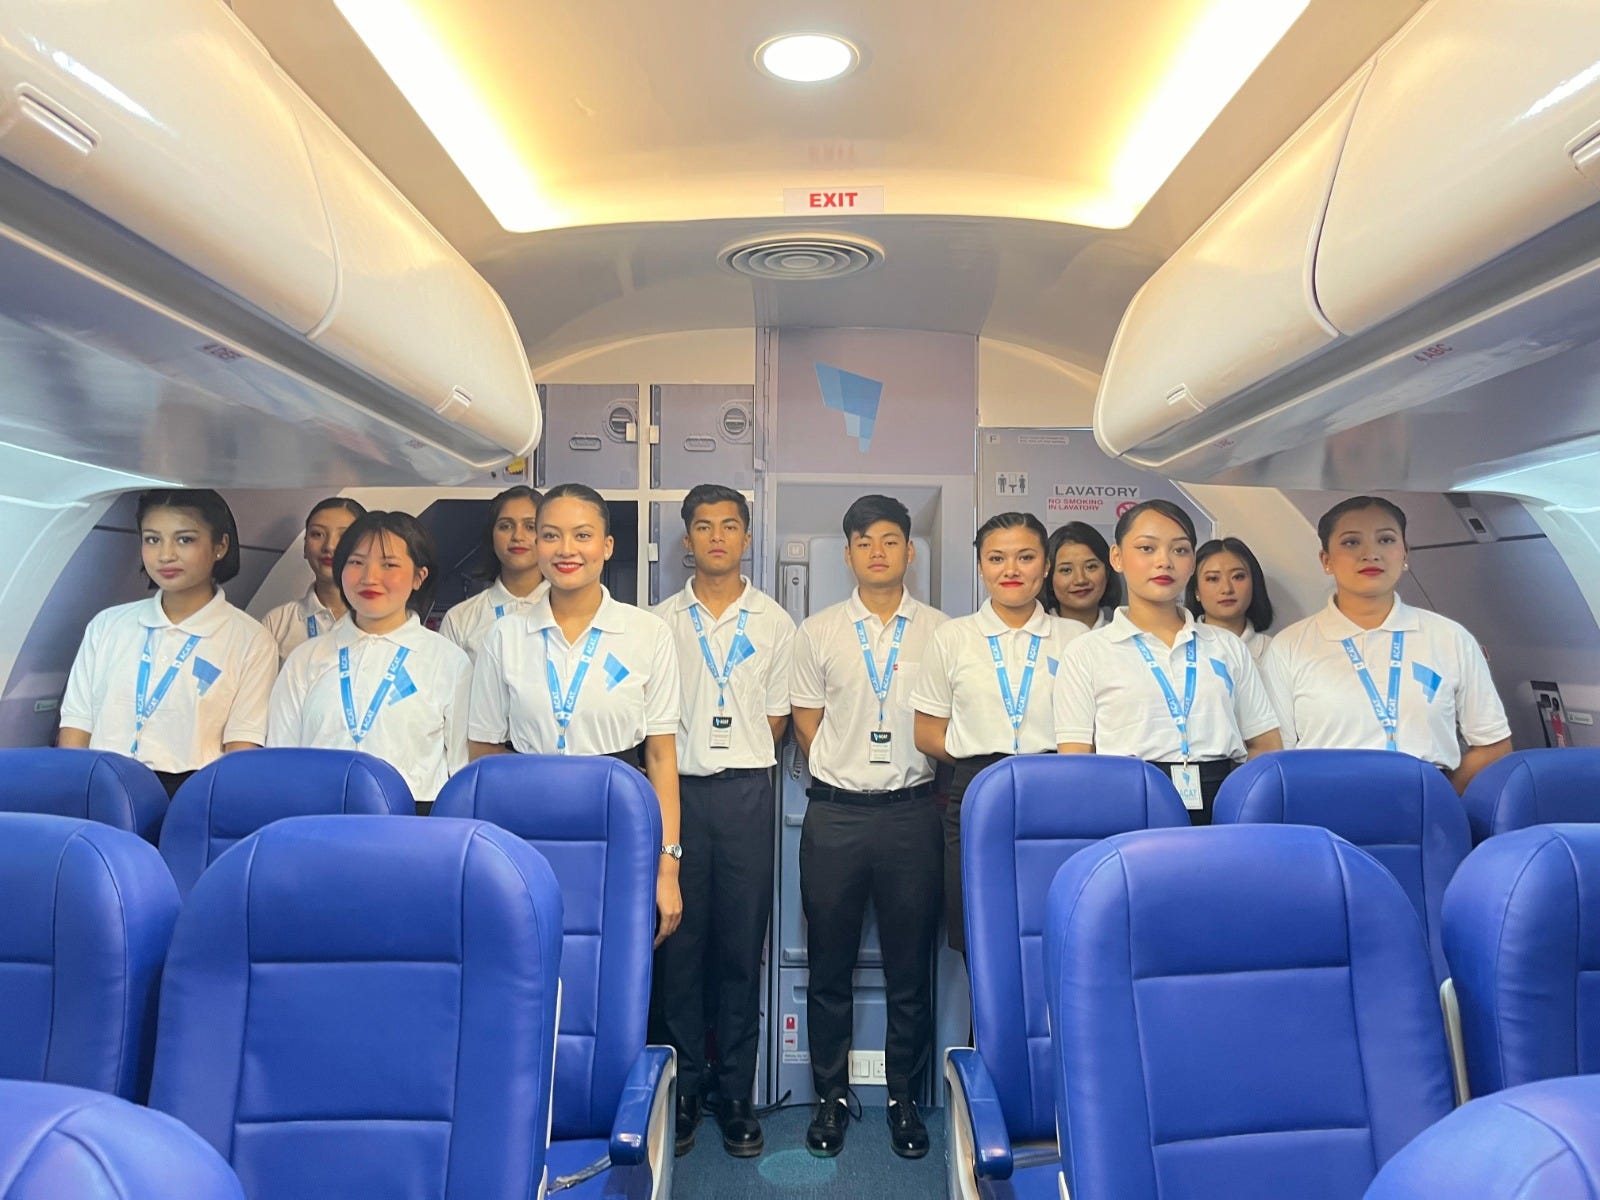 Career Prospects After Completing Air Hostess Training Courses in Sili